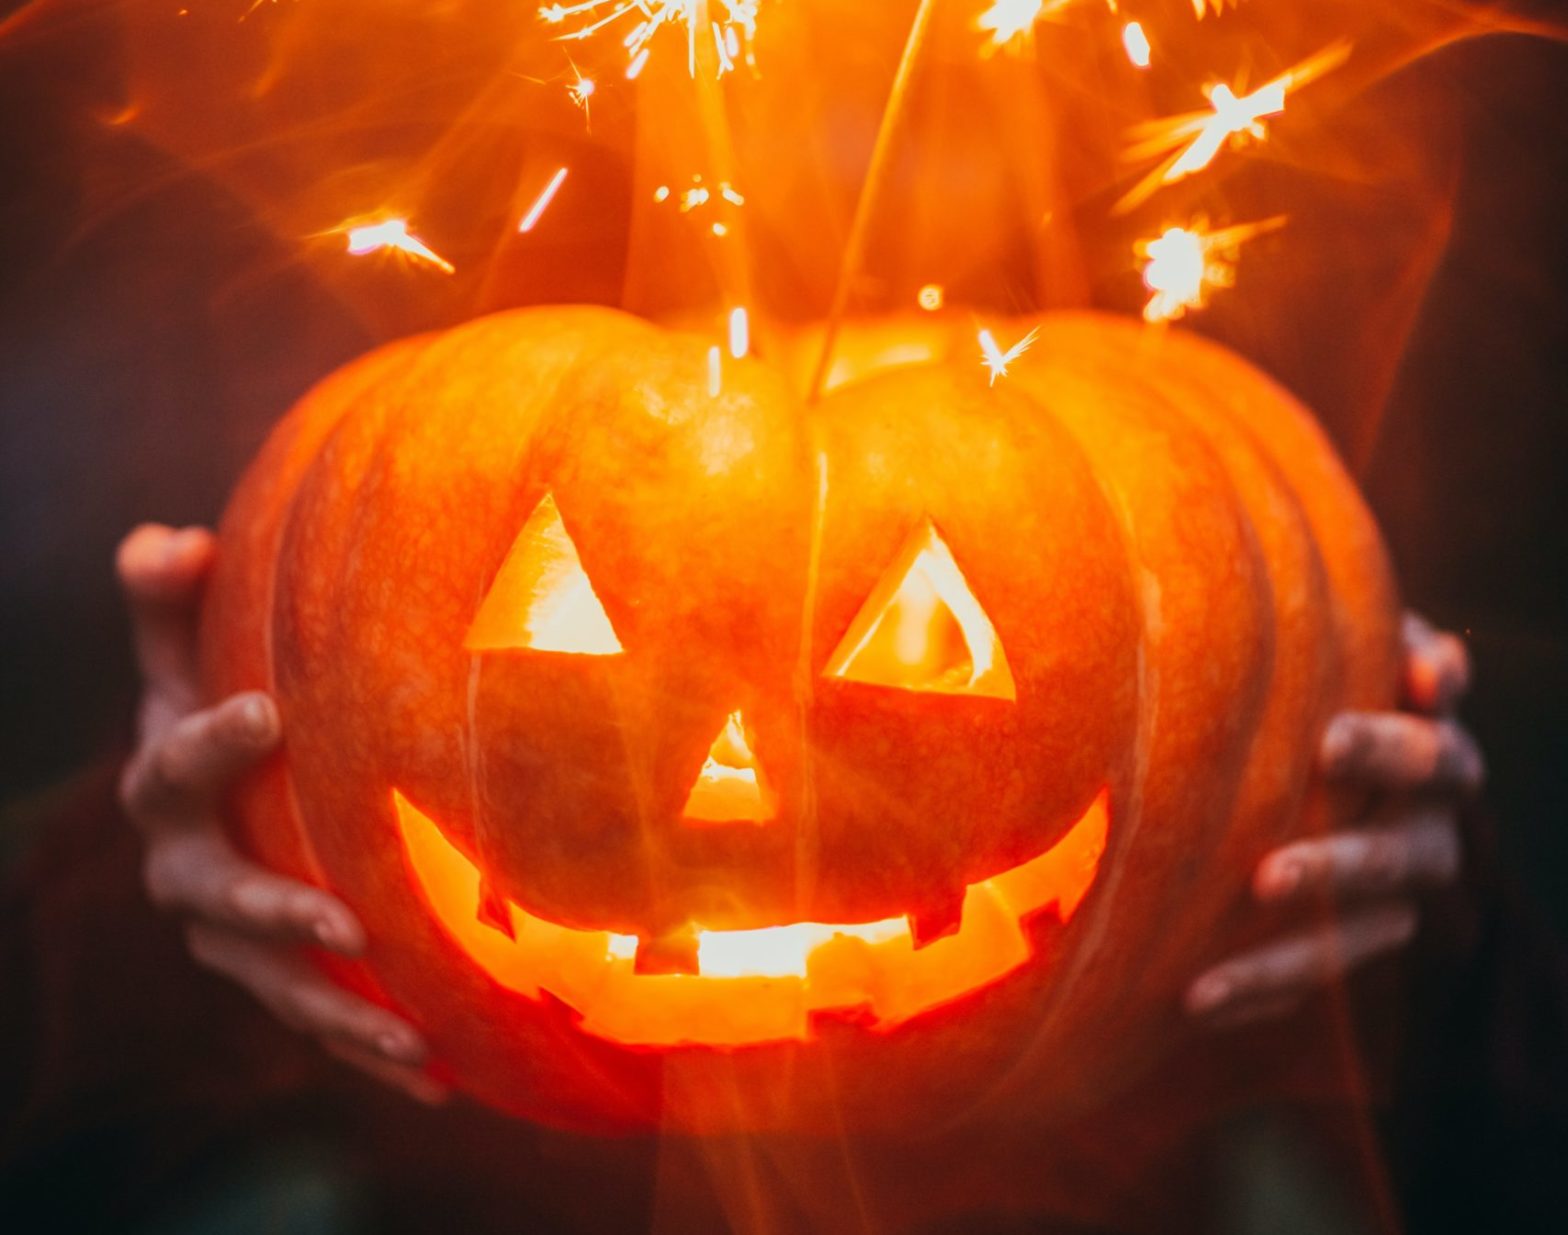 These Are The Top 5 Cities For Halloween Celebrations